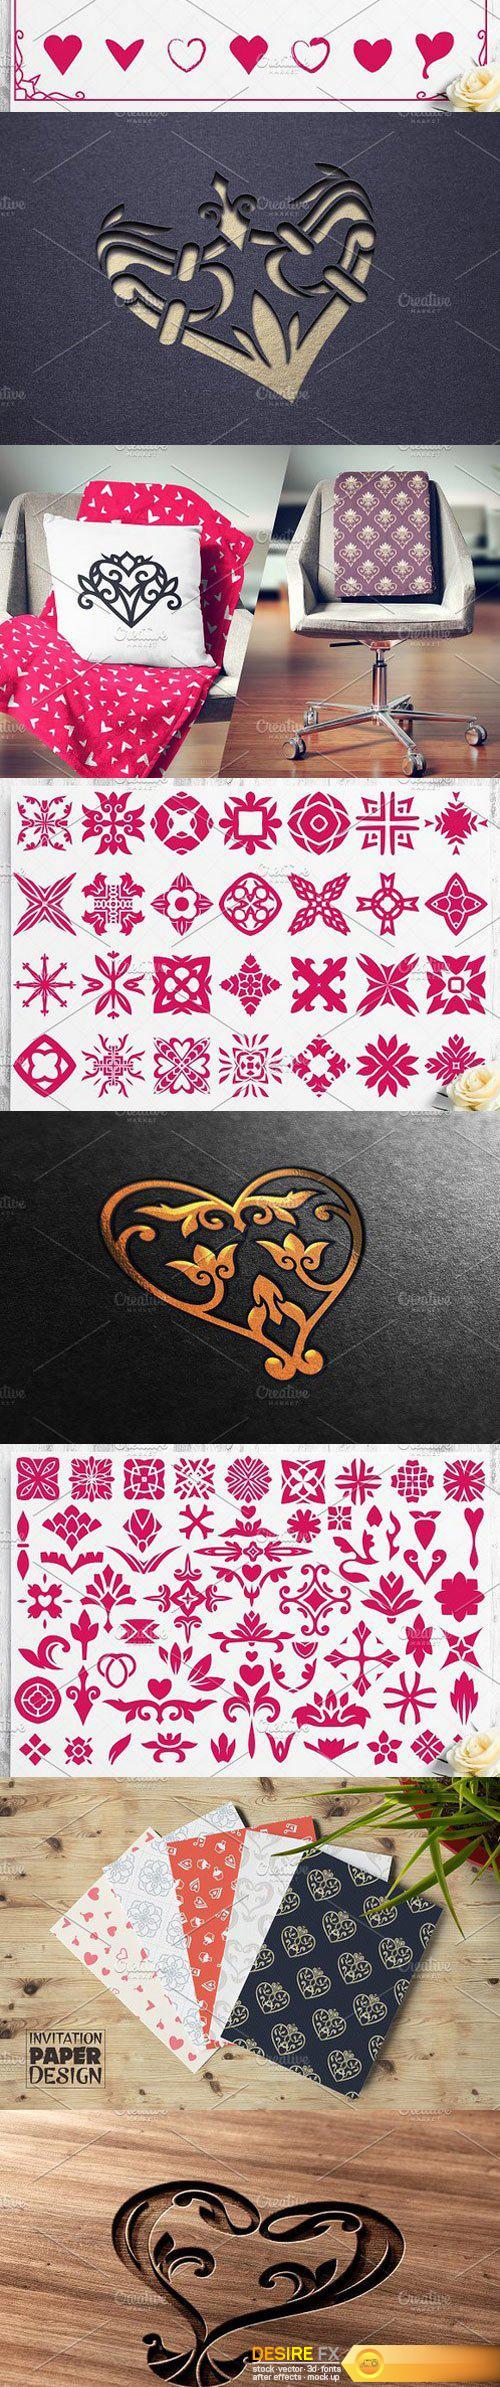 CM - Heart Vector Ornaments and Patterns 1278561